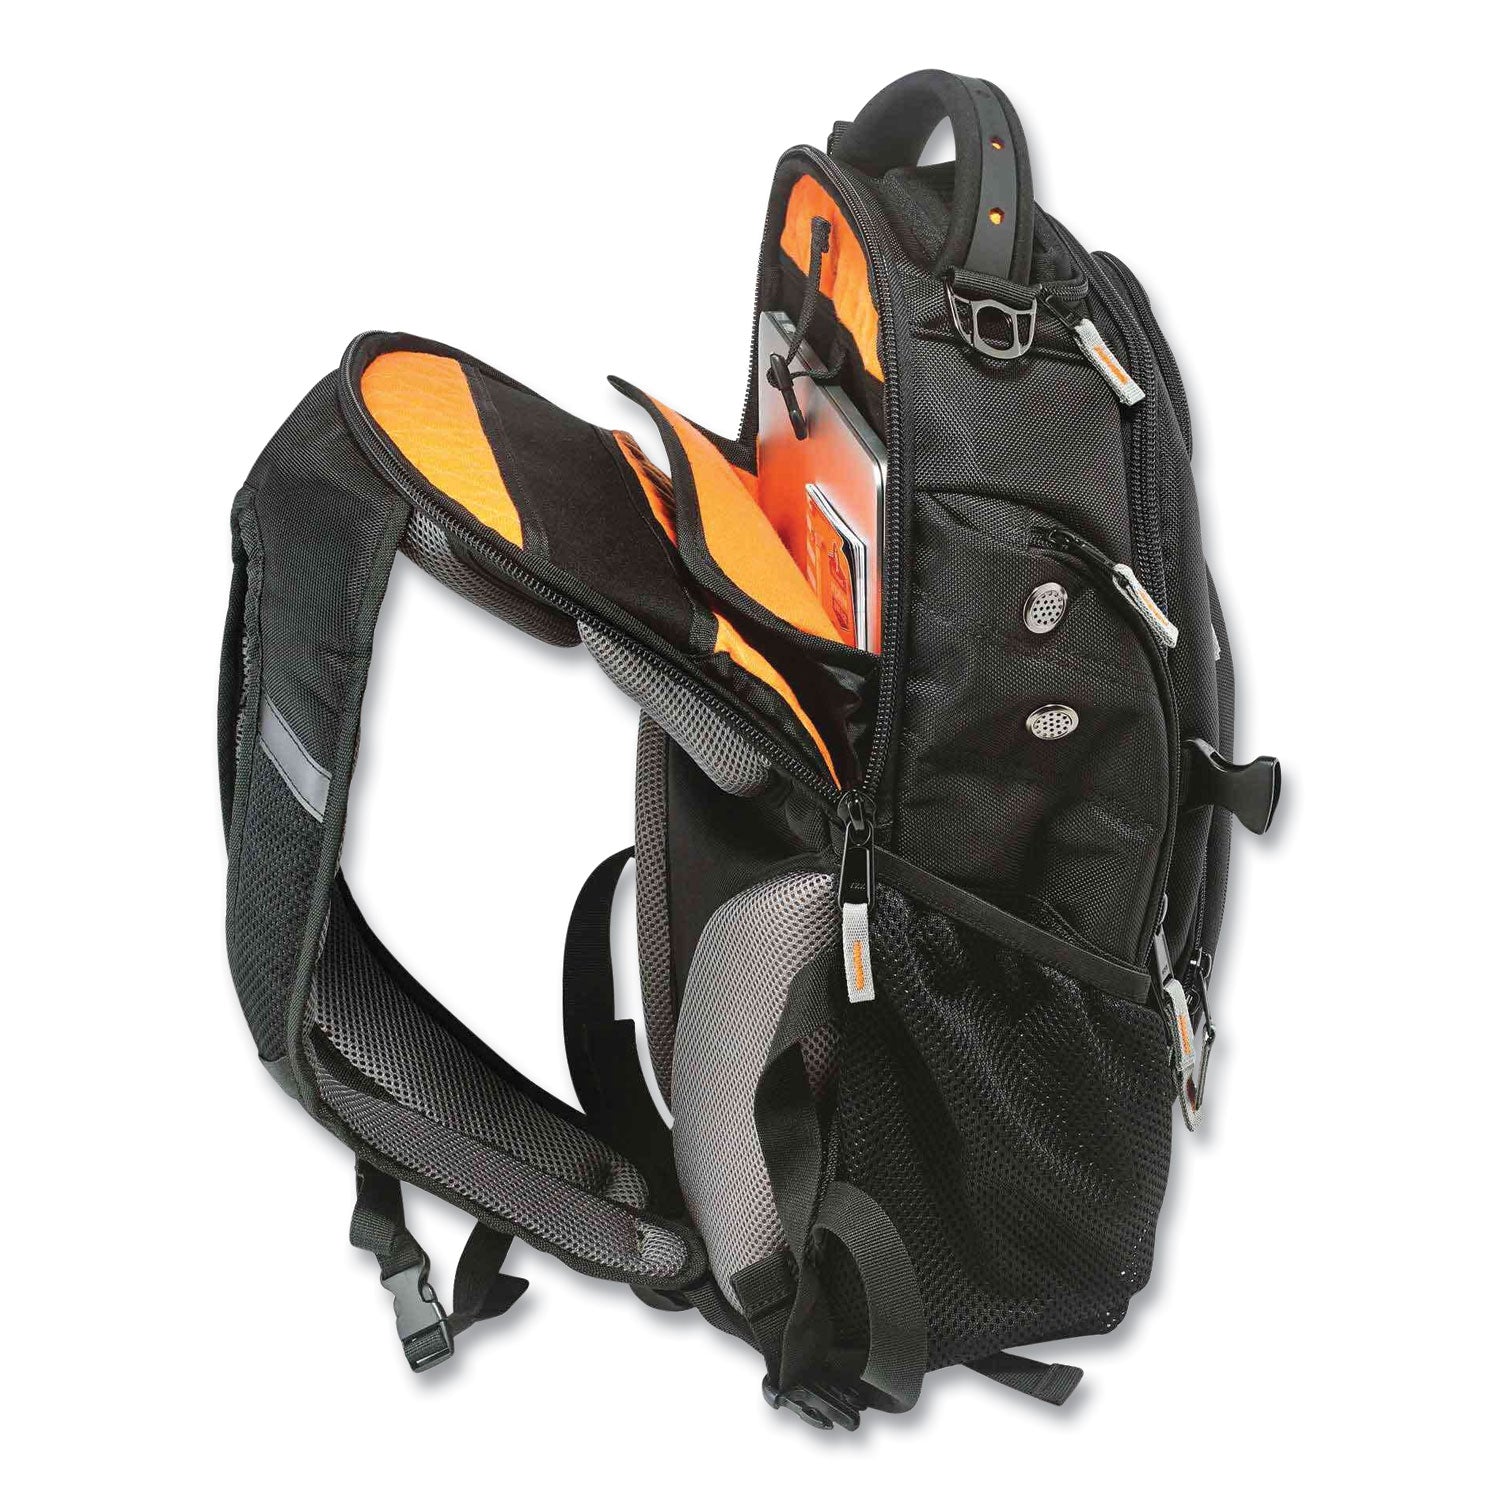 arsenal-5144-mobile-office-backpack-8-x-14-x-28-black-ships-in-1-3-business-days_ego13044 - 6